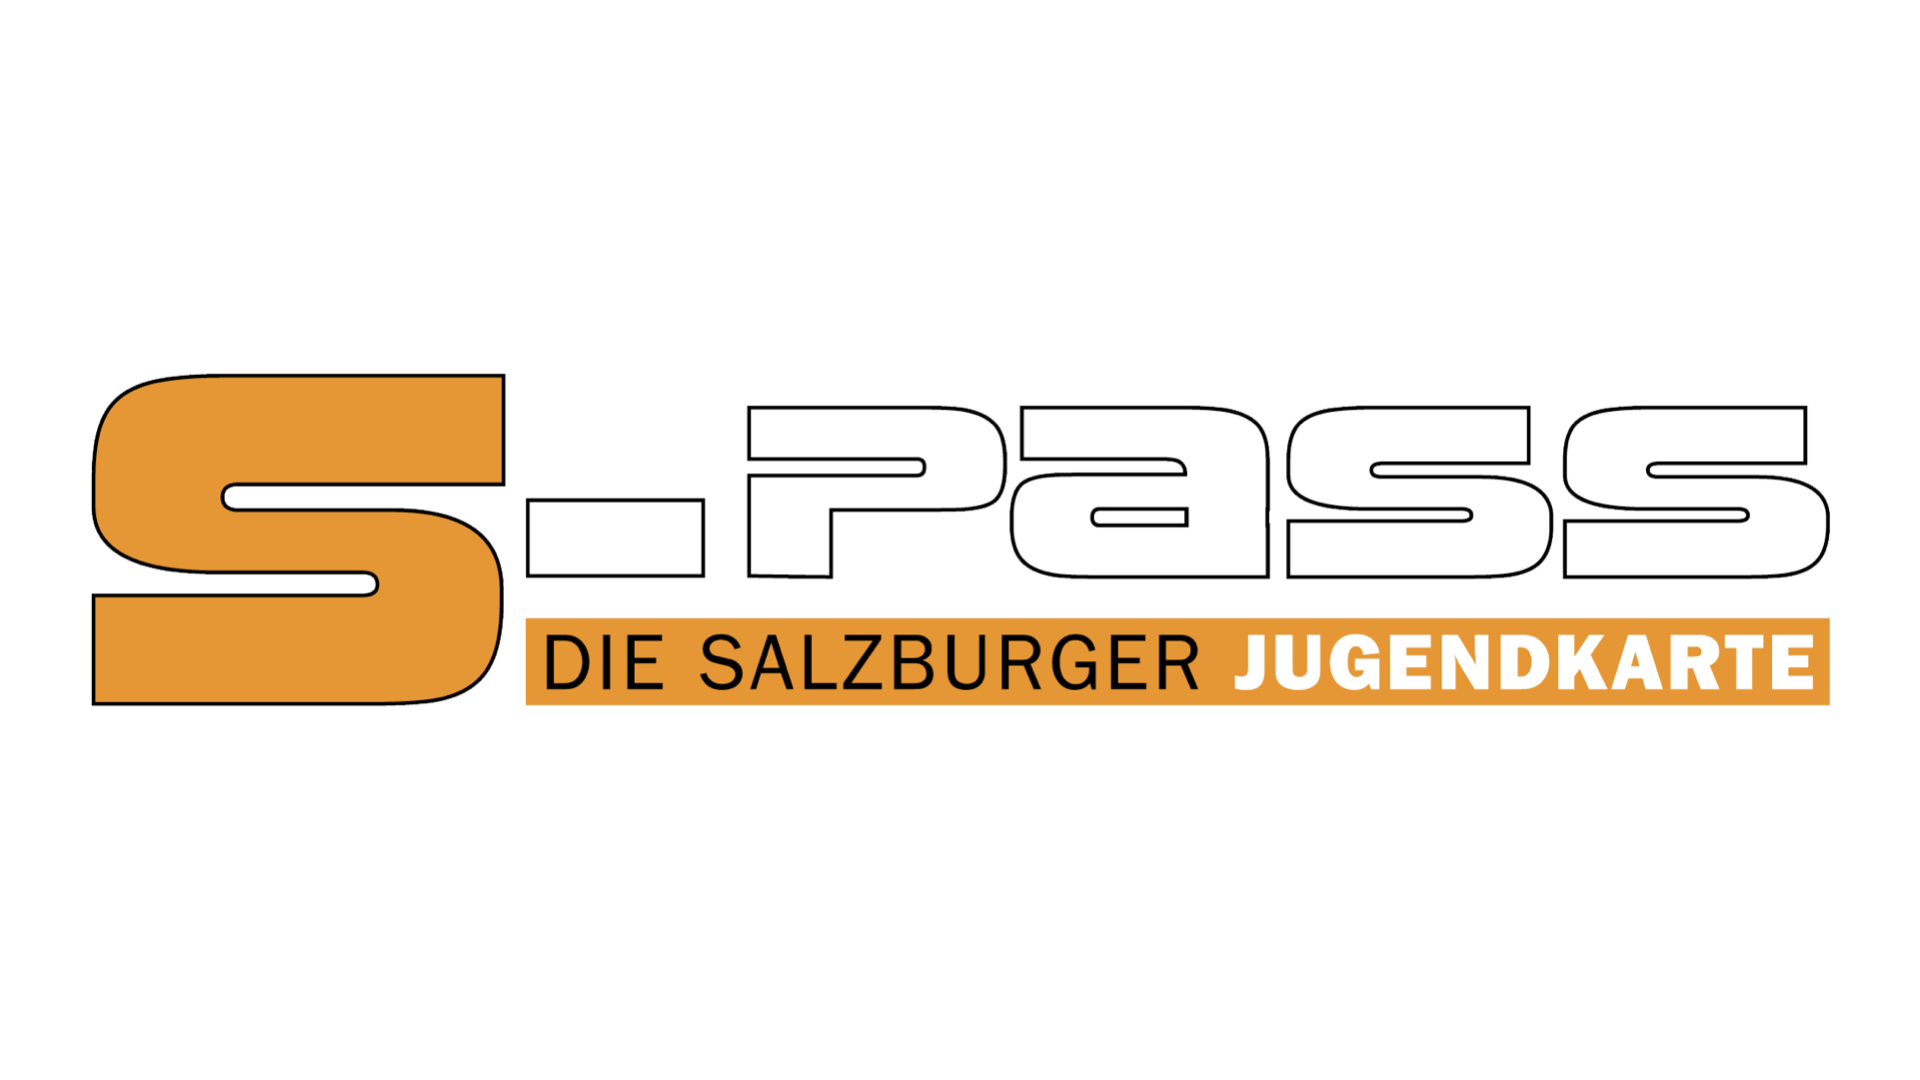 https://www.levelup-salzburg.at/wp-content/uploads/2021/11/s-pass-logo.png